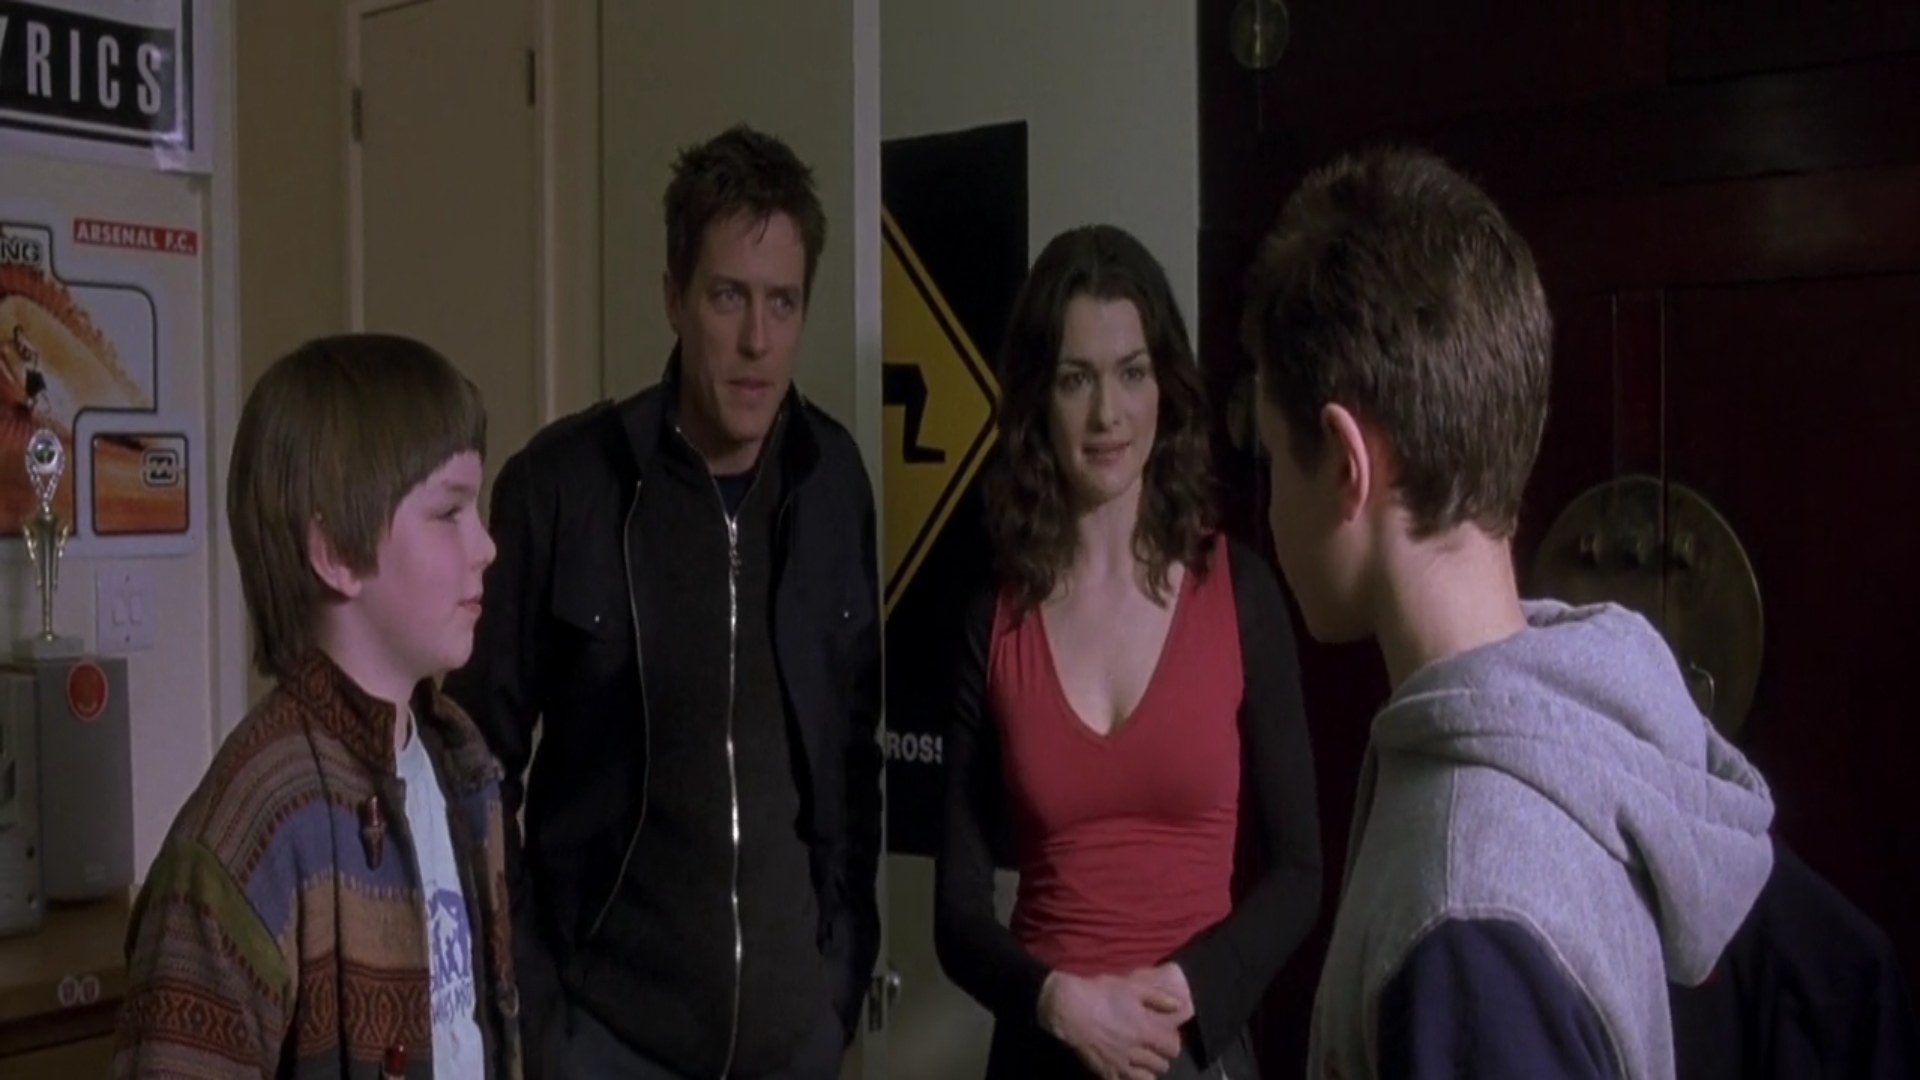 Hugh Grant and Rachel Weisz look at two boys looking at each other